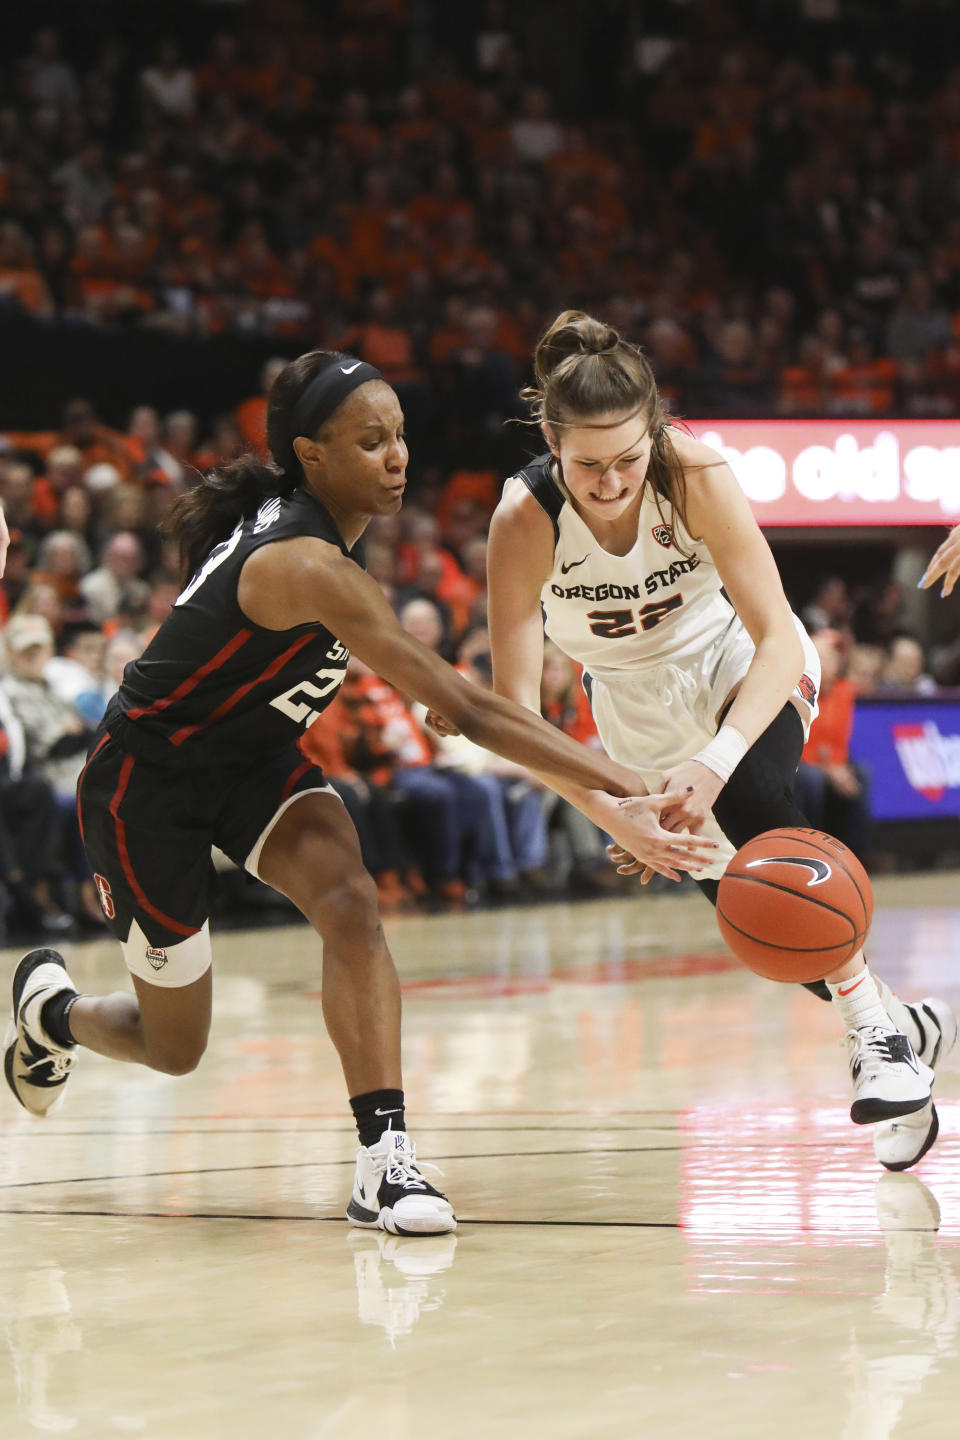 Stanford's Kiana Williams (23) swats the ball away from Oregon State's Kat Tudor (22) during the first half of an NCAA college basketball game against Oregon State/Stanford in Corvallis, Ore., Sunday, Jan. 19, 2020. (AP Photo/Amanda Loman)